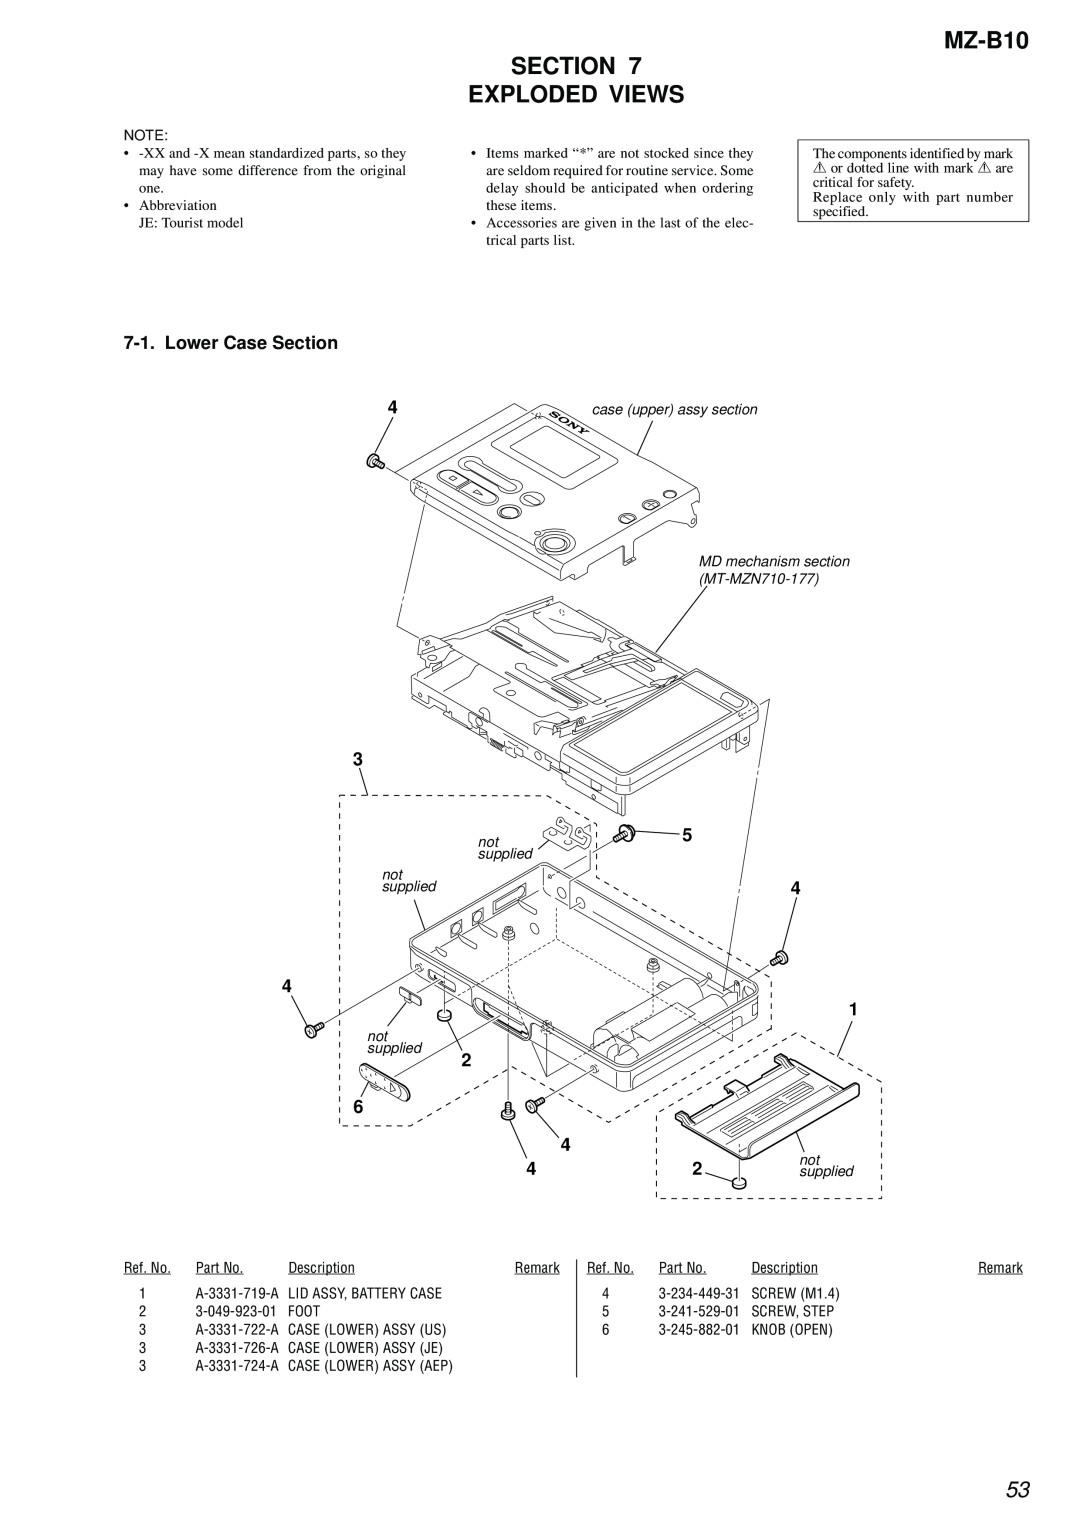 Sony MZ-B10 service manual Exploded Views, Lower Case Section 